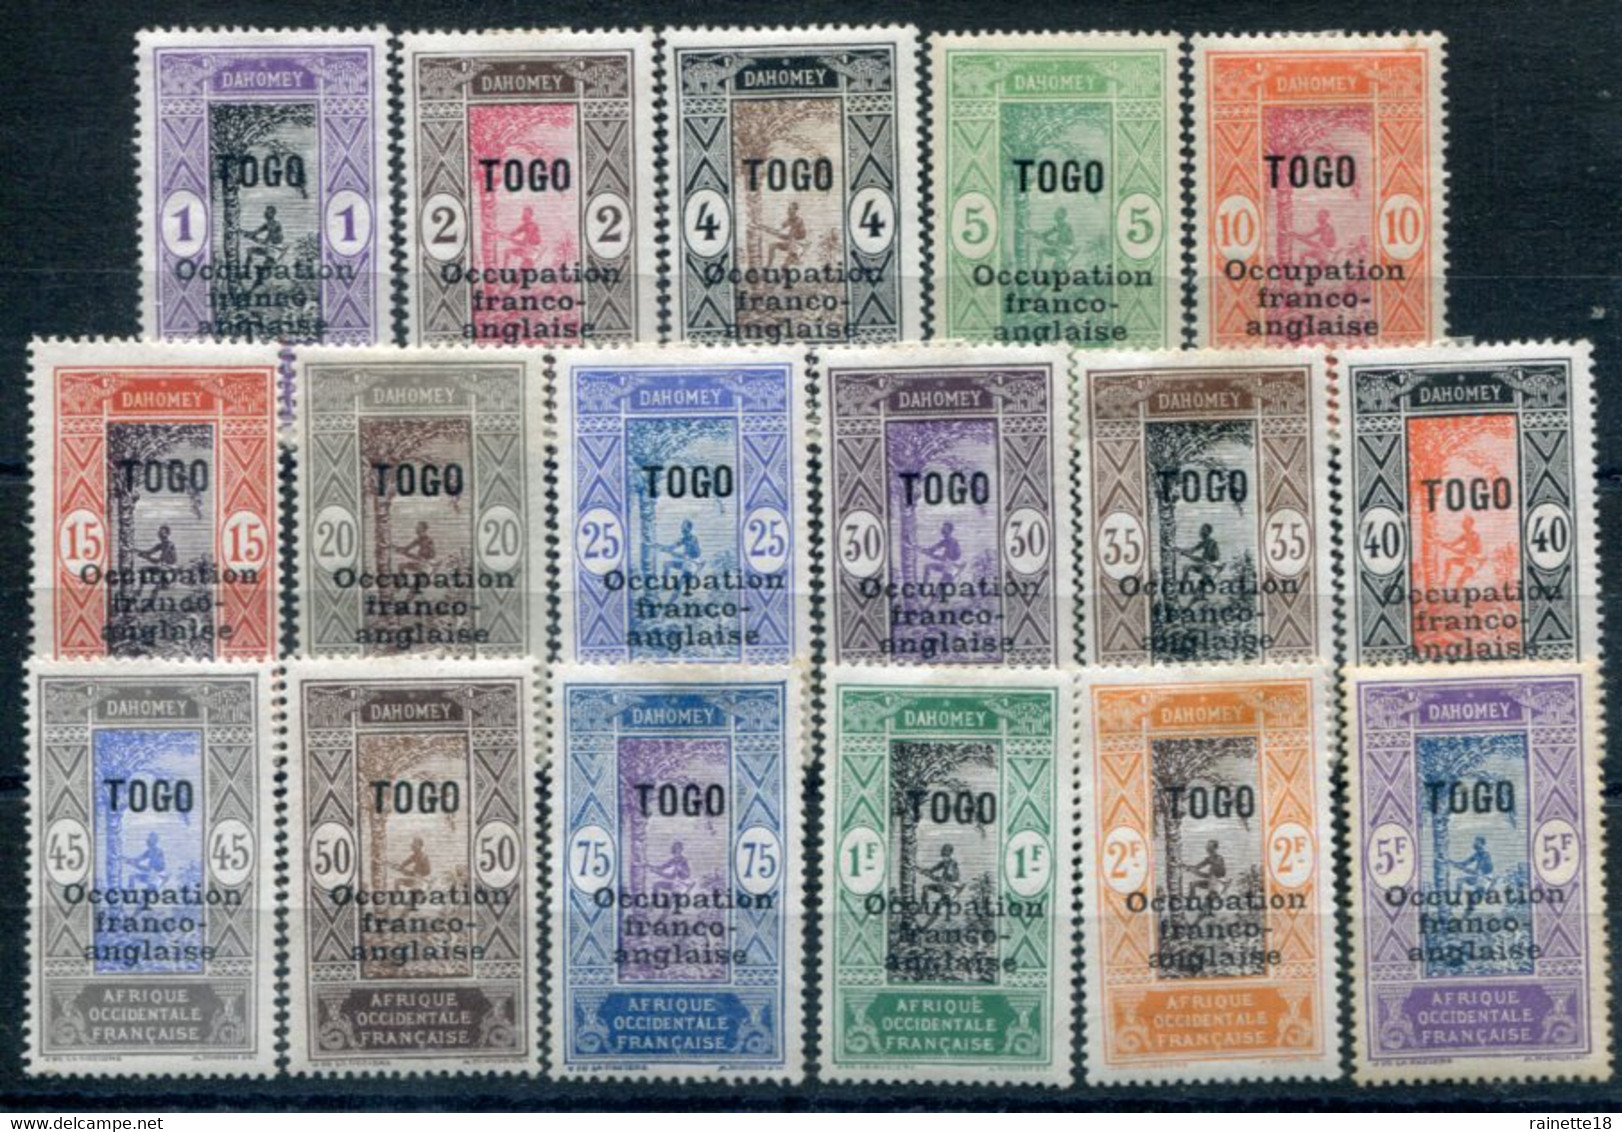 Togo         84/100 *   Occupation Franco-anglaise - Unused Stamps